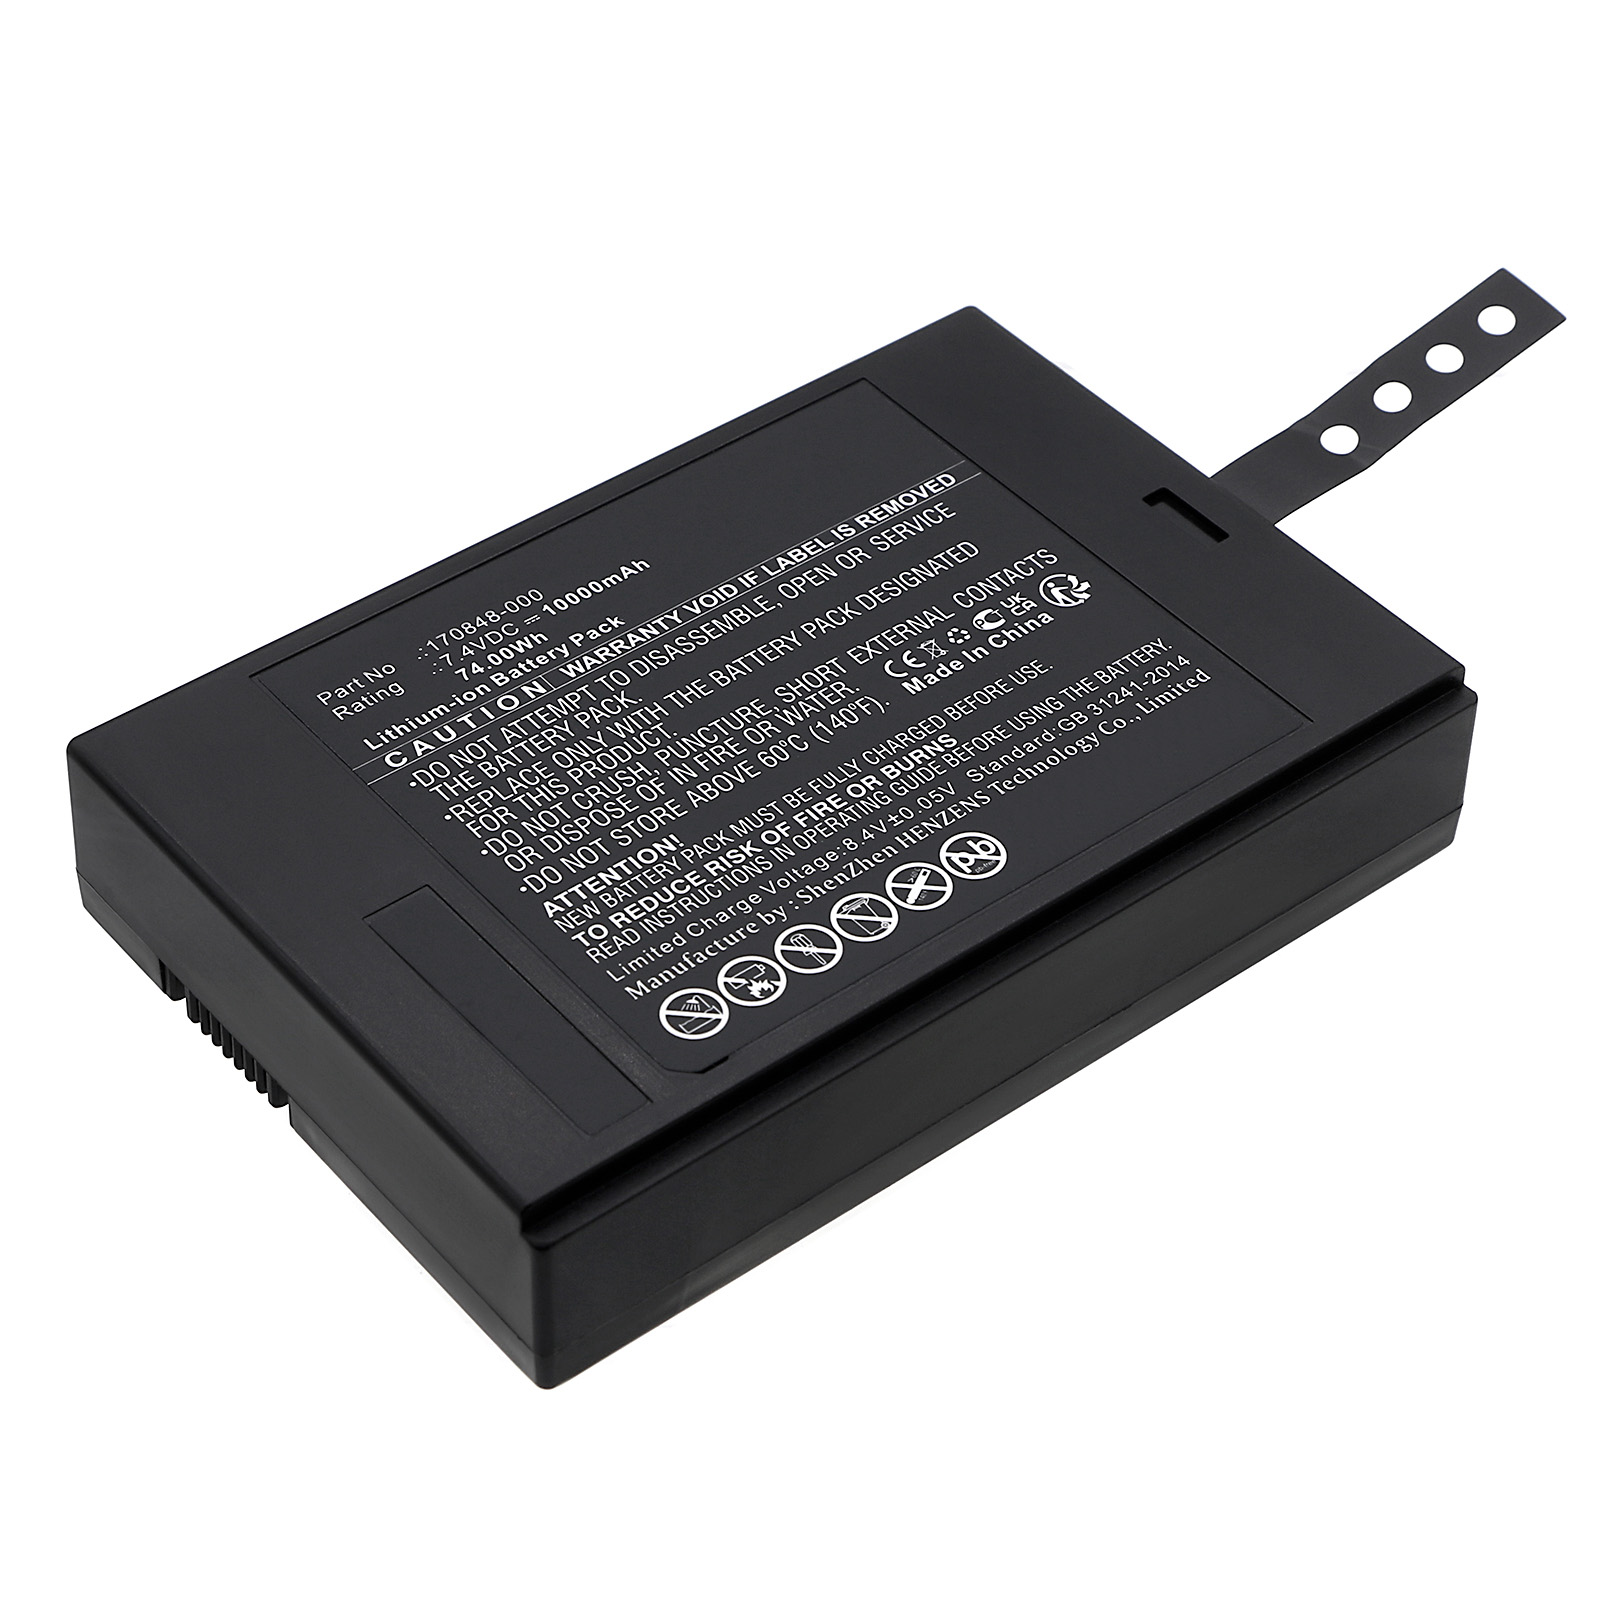 Synergy Digital Cable Modem Battery, Compatible with Cradlepoint 170848-000 Cable Modem Battery (Li-ion, 7.4V, 10000mAh)